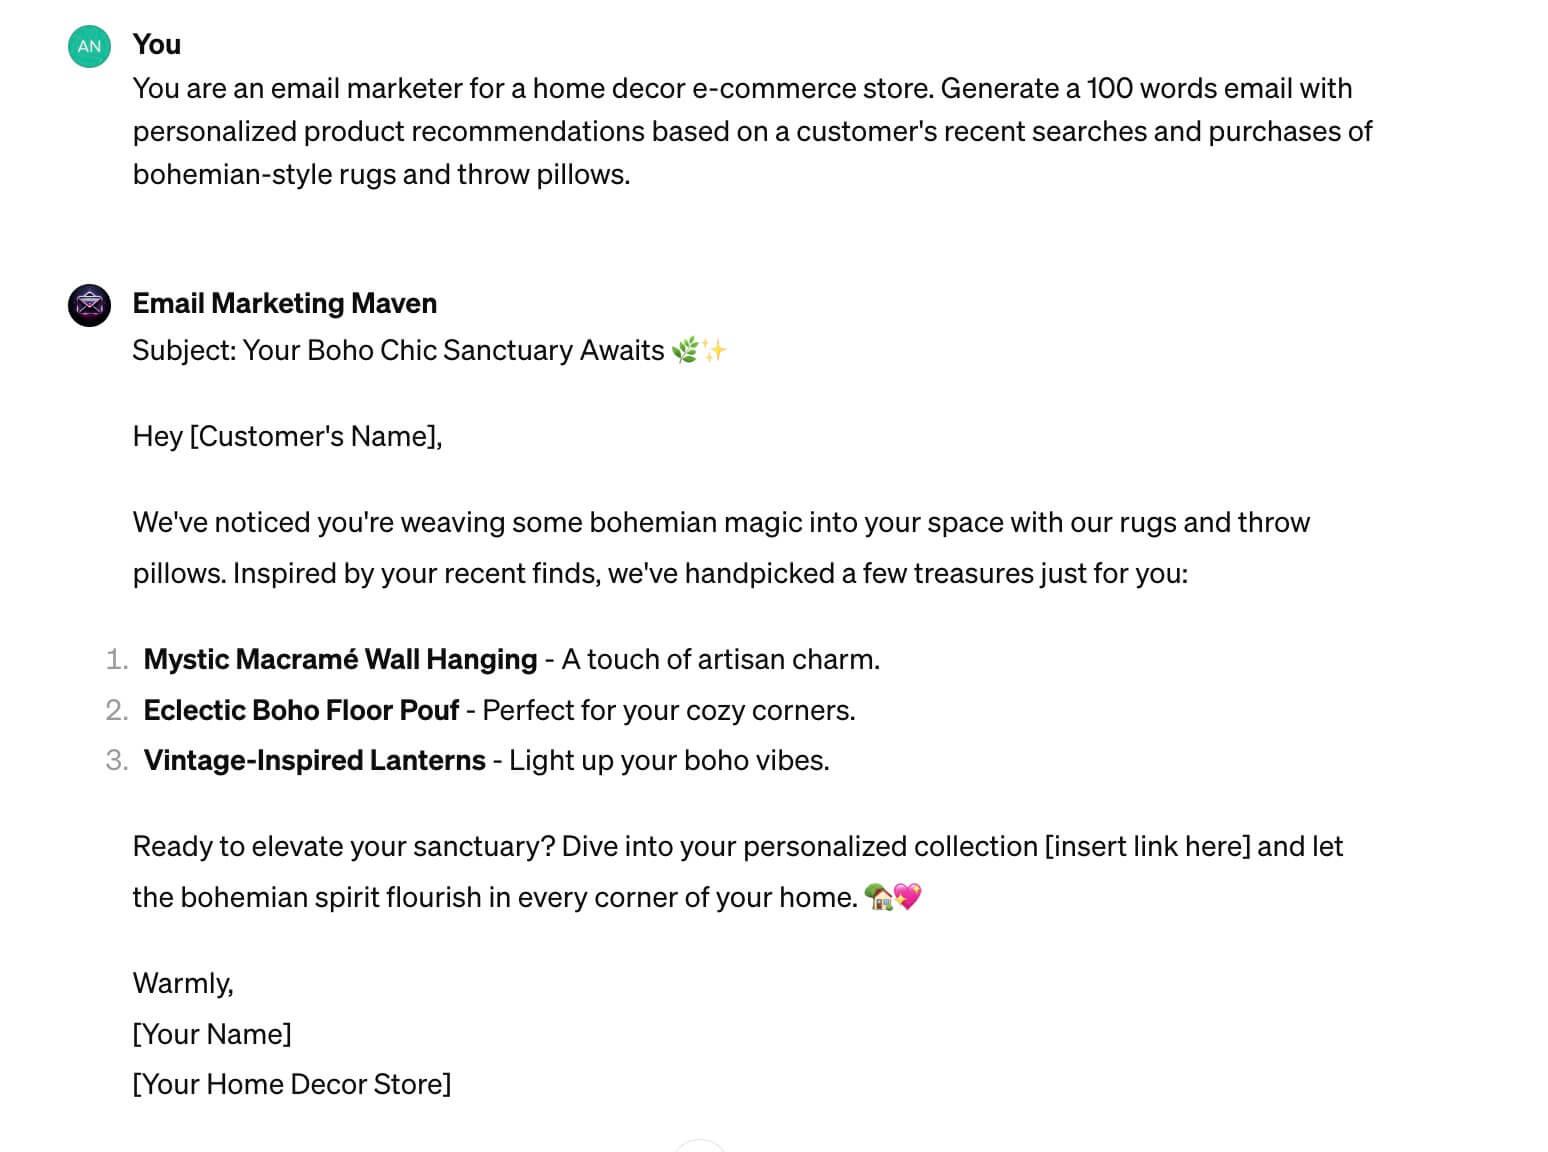 Example of an email prompt to generate personalized product recommendations for bohemian-style home decor